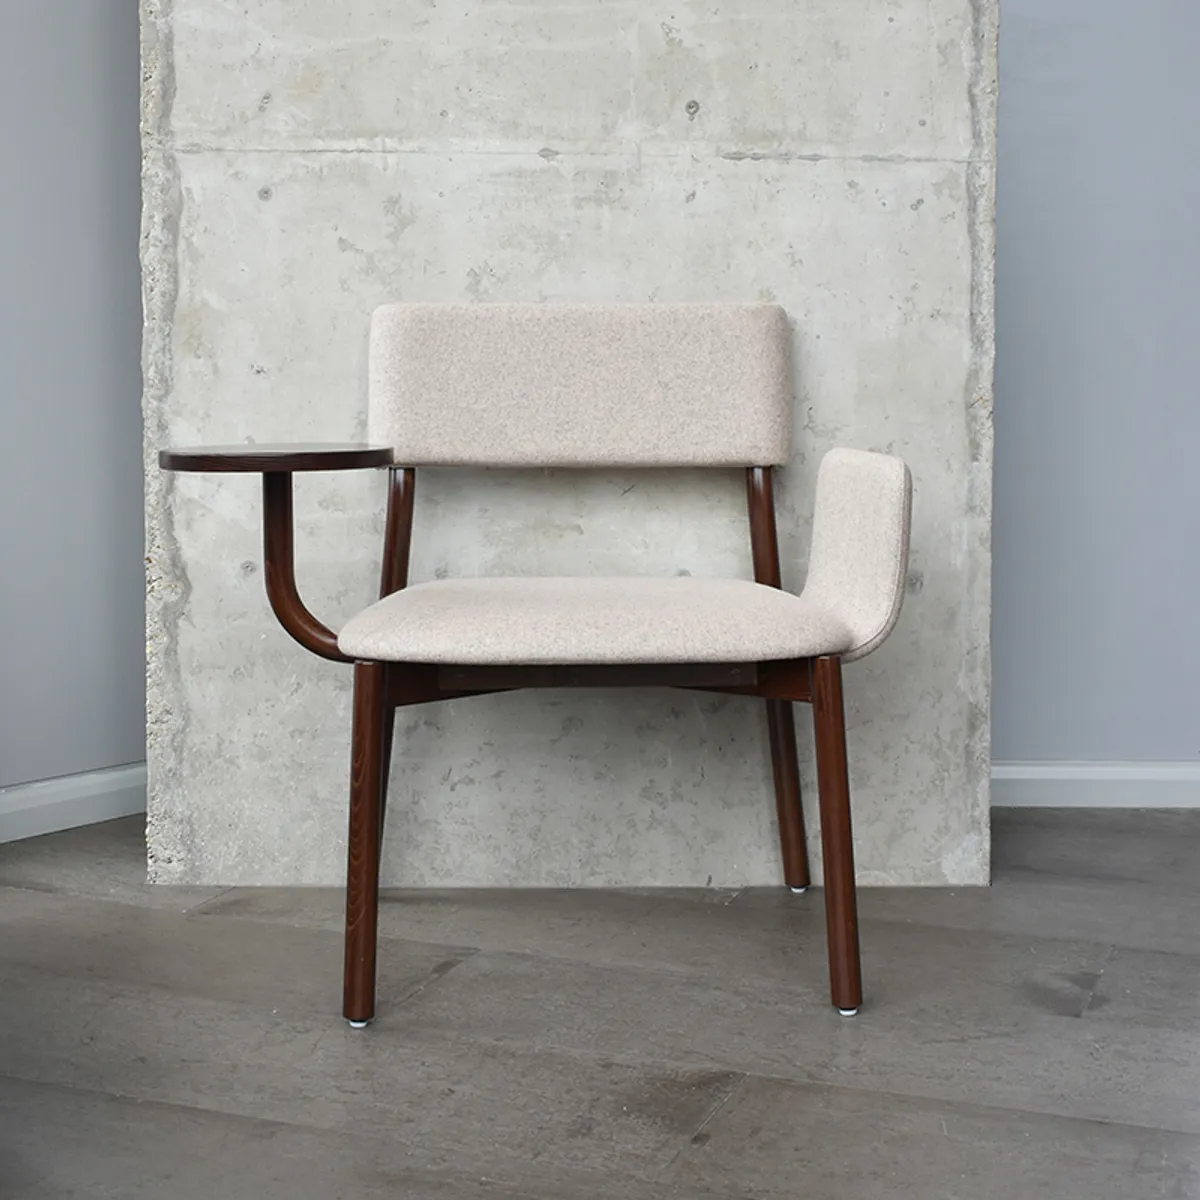 Scuelle Chair New Furniture From Milan 2019 By Inside Out Contracts 050